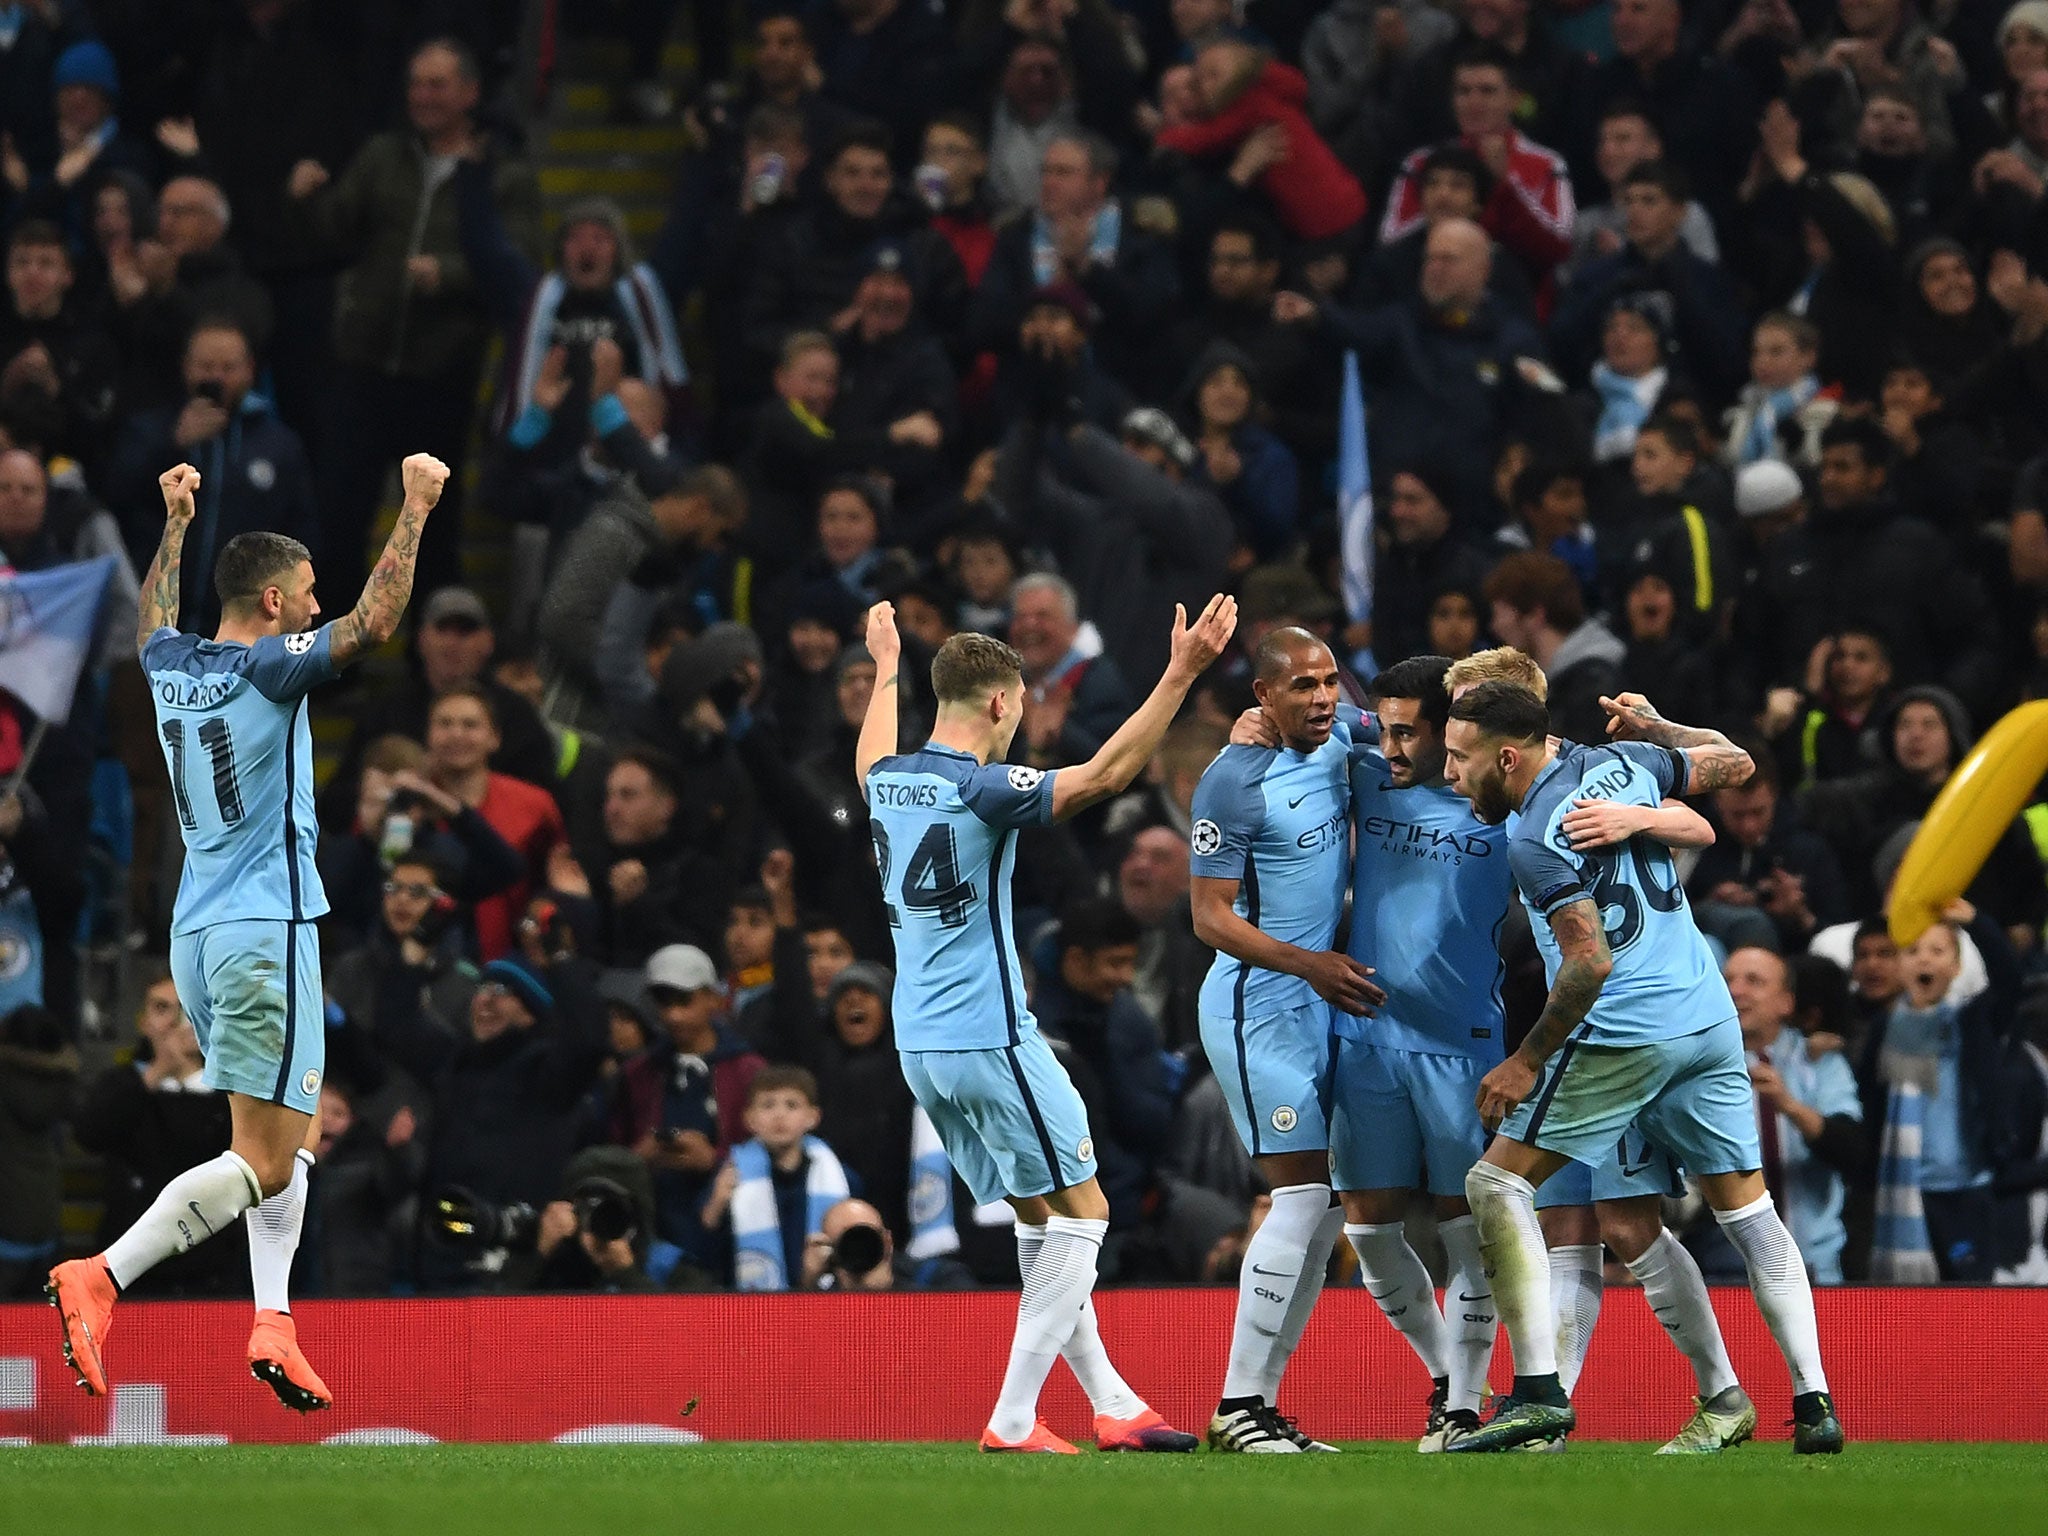 Manchester City are now in a strong position to qualify after beating Barcelona on Tuesday night